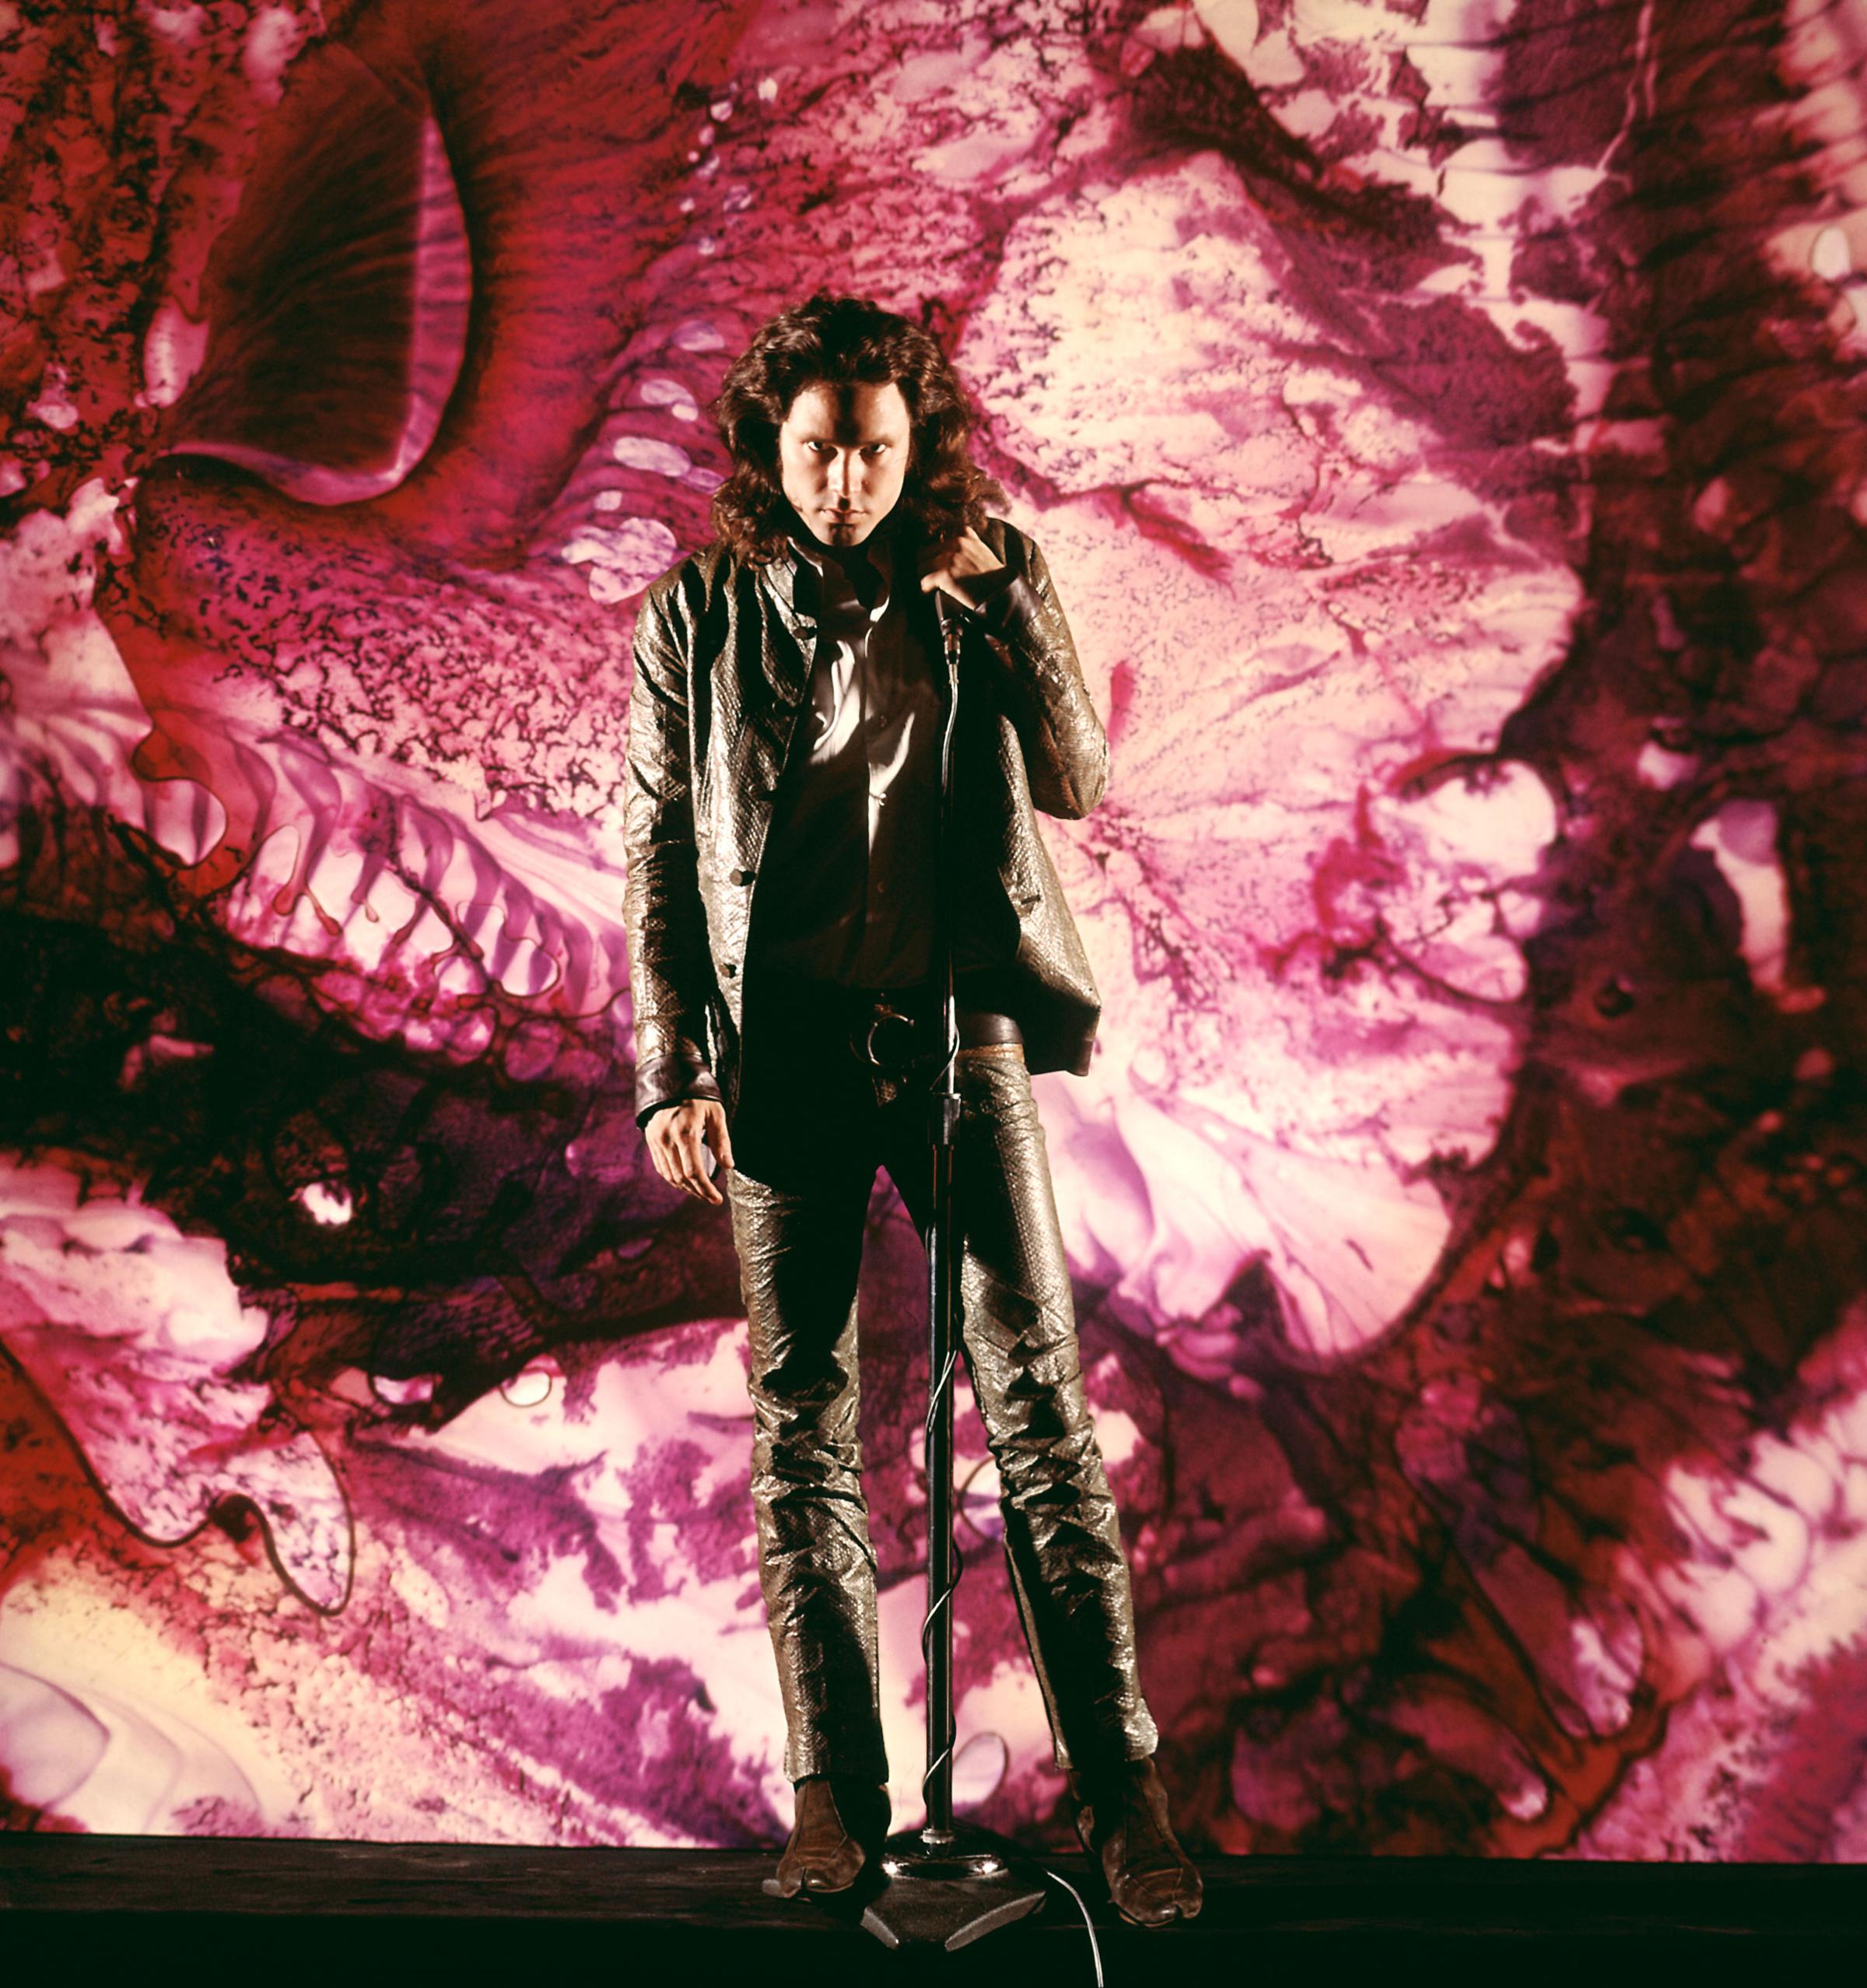 Jim Morrison, photographed in New York City by LIFE's Yale Joel in 1968.